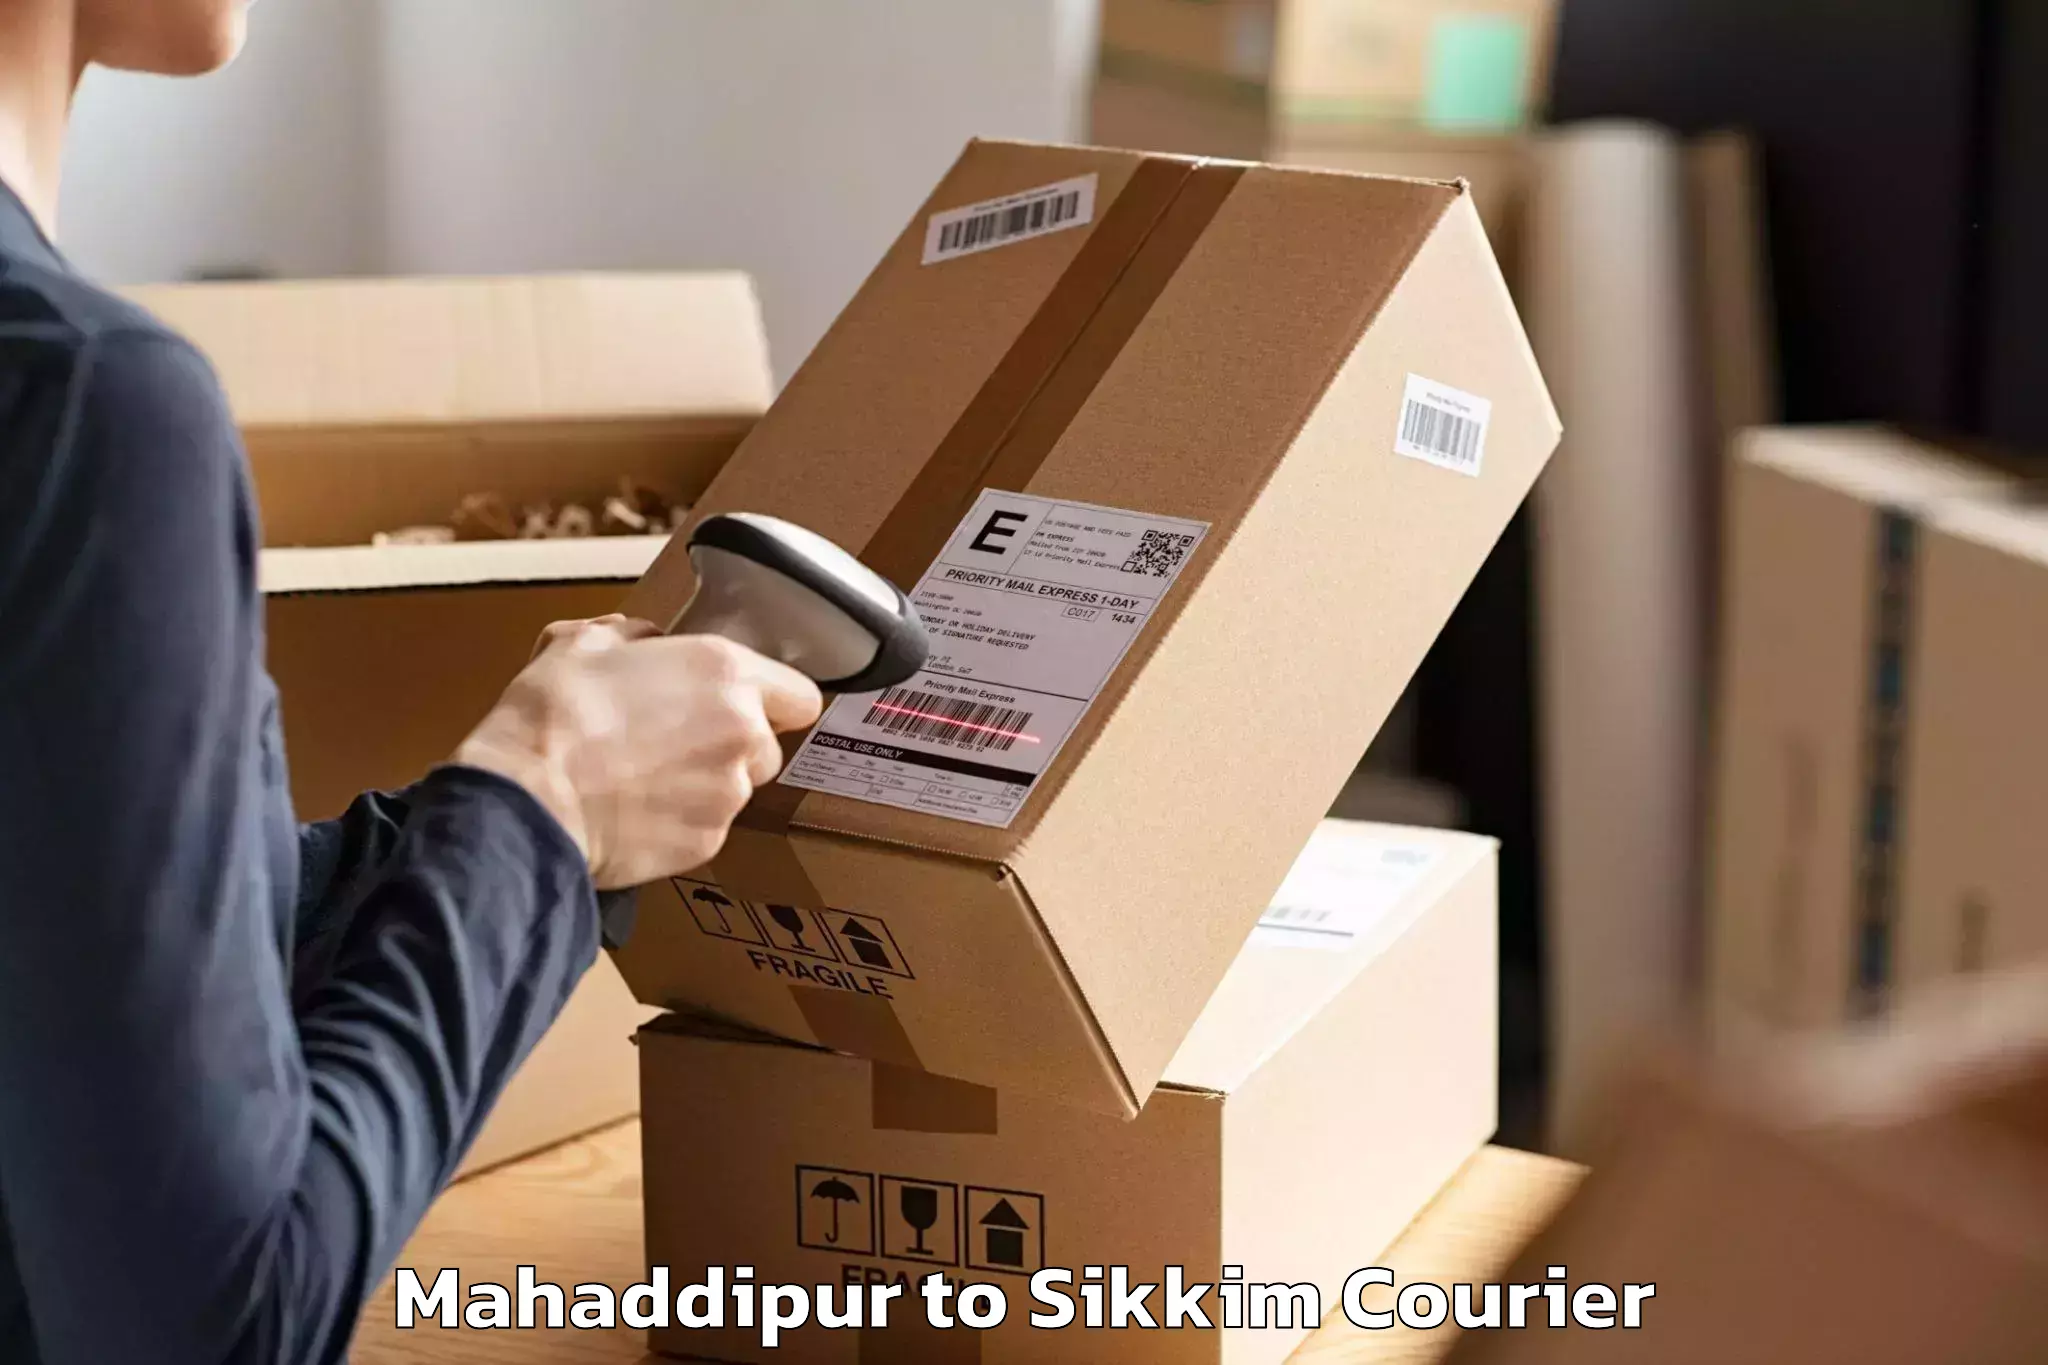 Professional movers and packers Mahaddipur to Gangtok